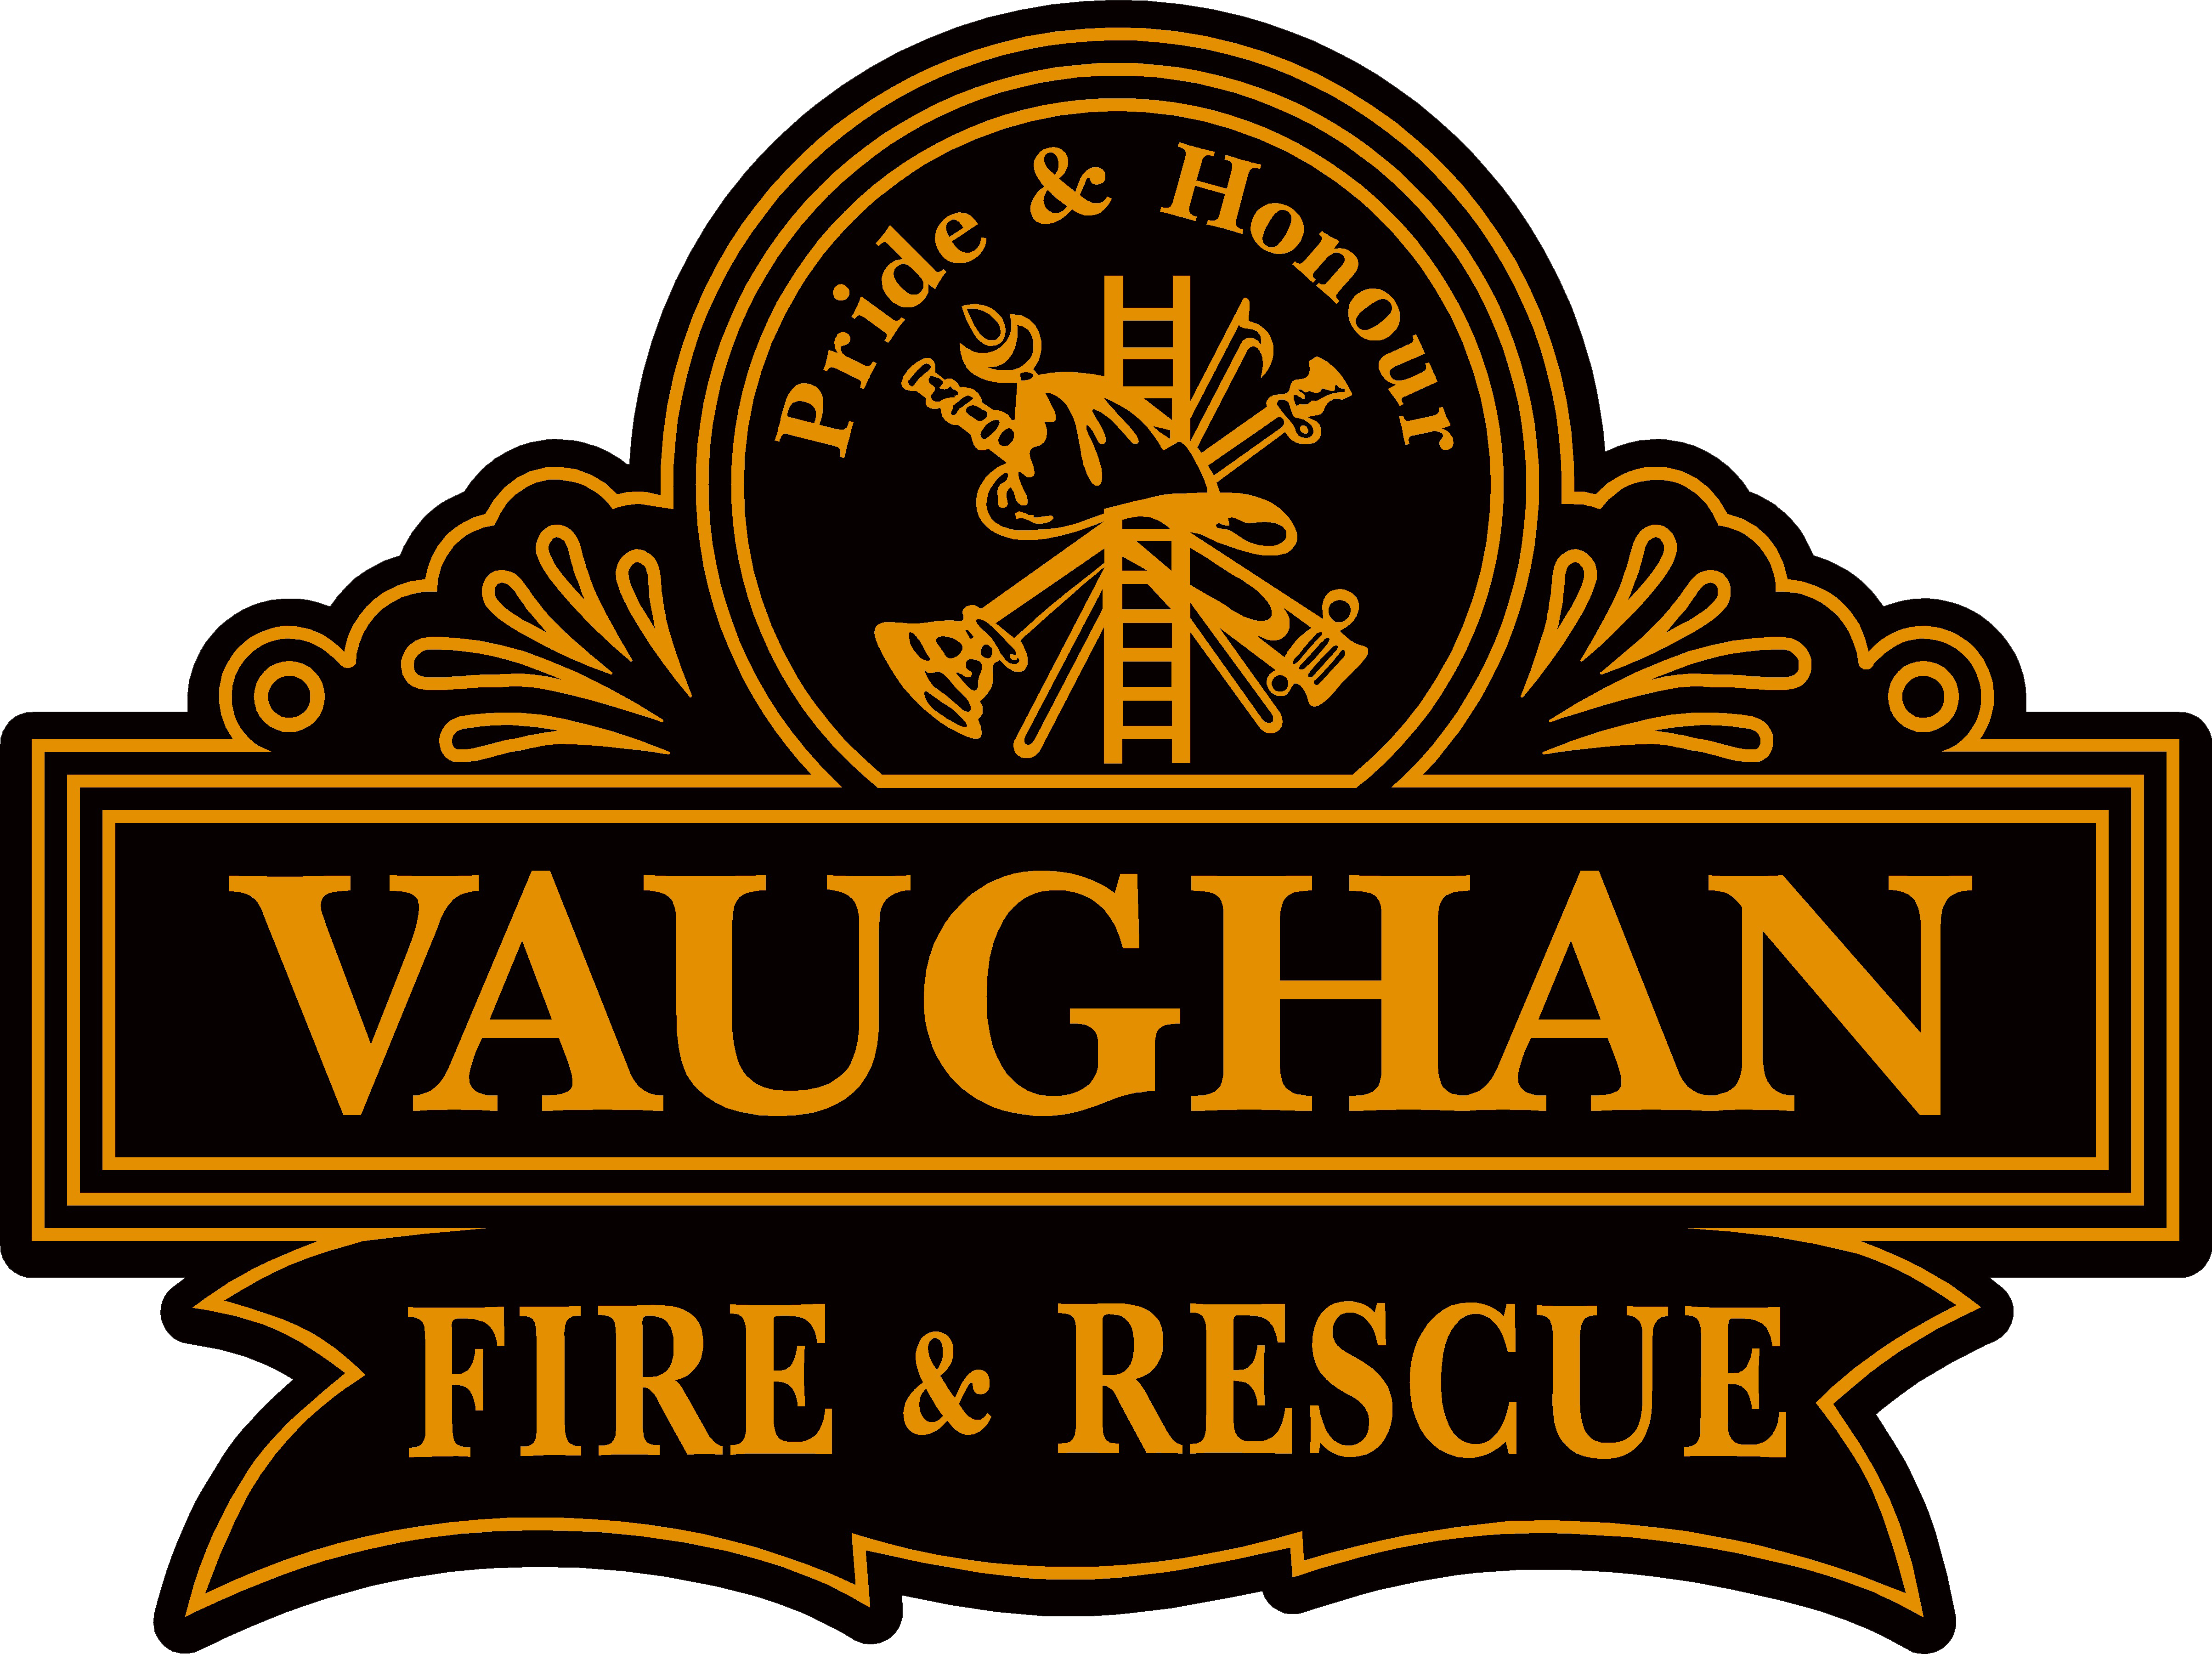 Vaughan Fire & Rescue